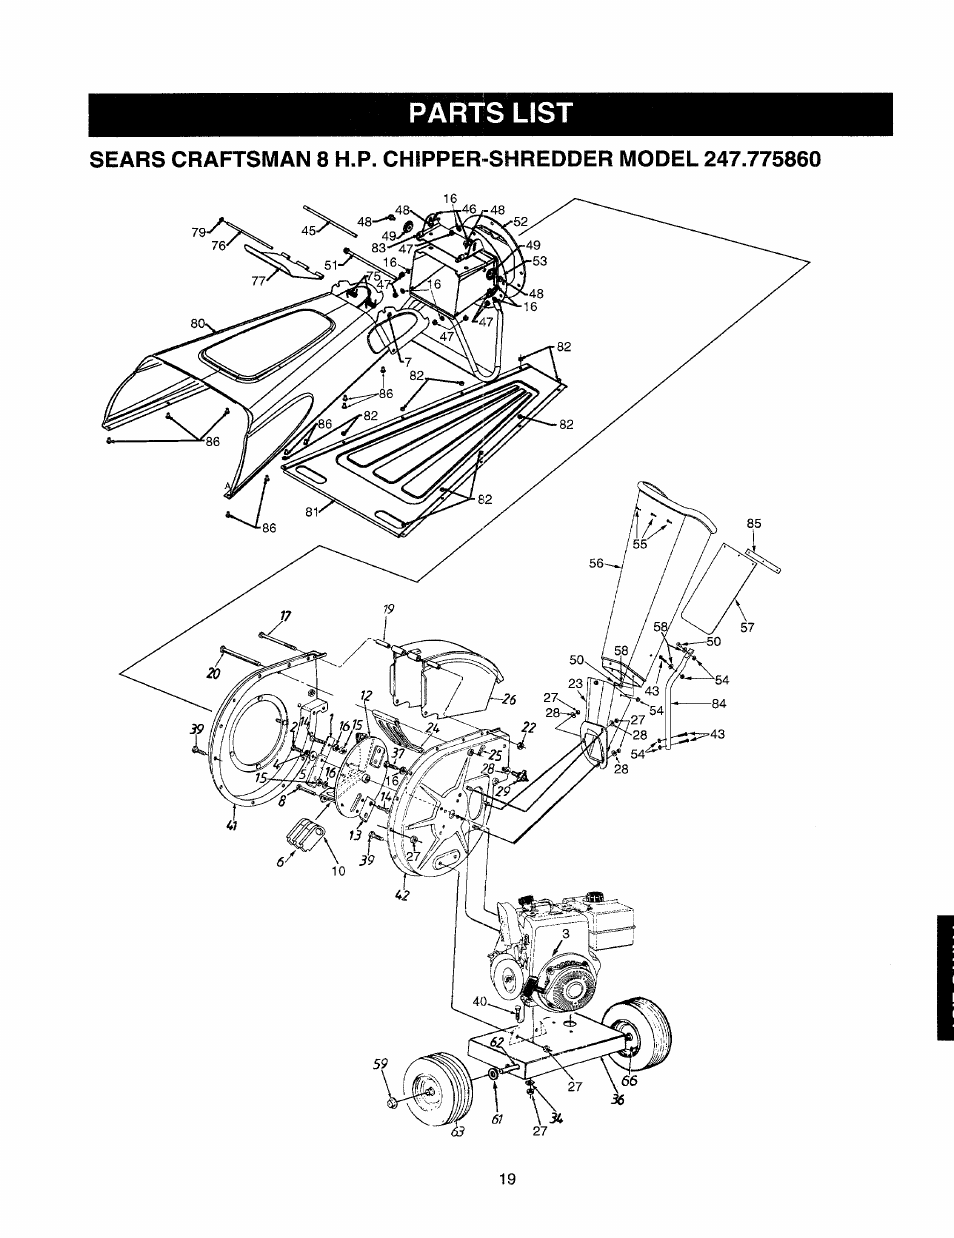 Parts list | Craftsman 247.775860 User Manual | Page 19 / 46